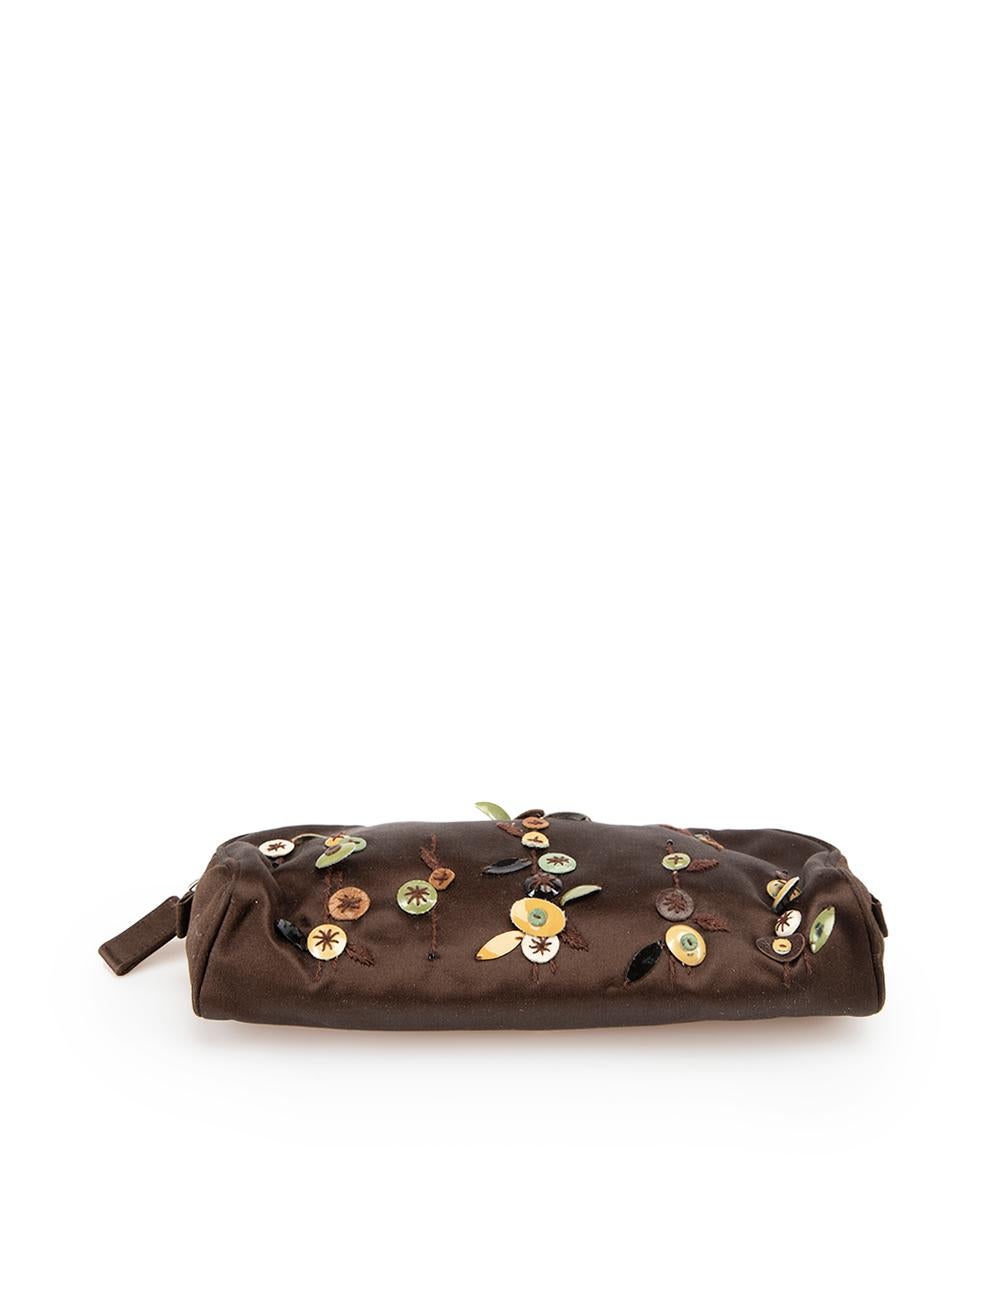 Prada Women's Vintage Brown Satin Embroidered Pouch For Sale 2